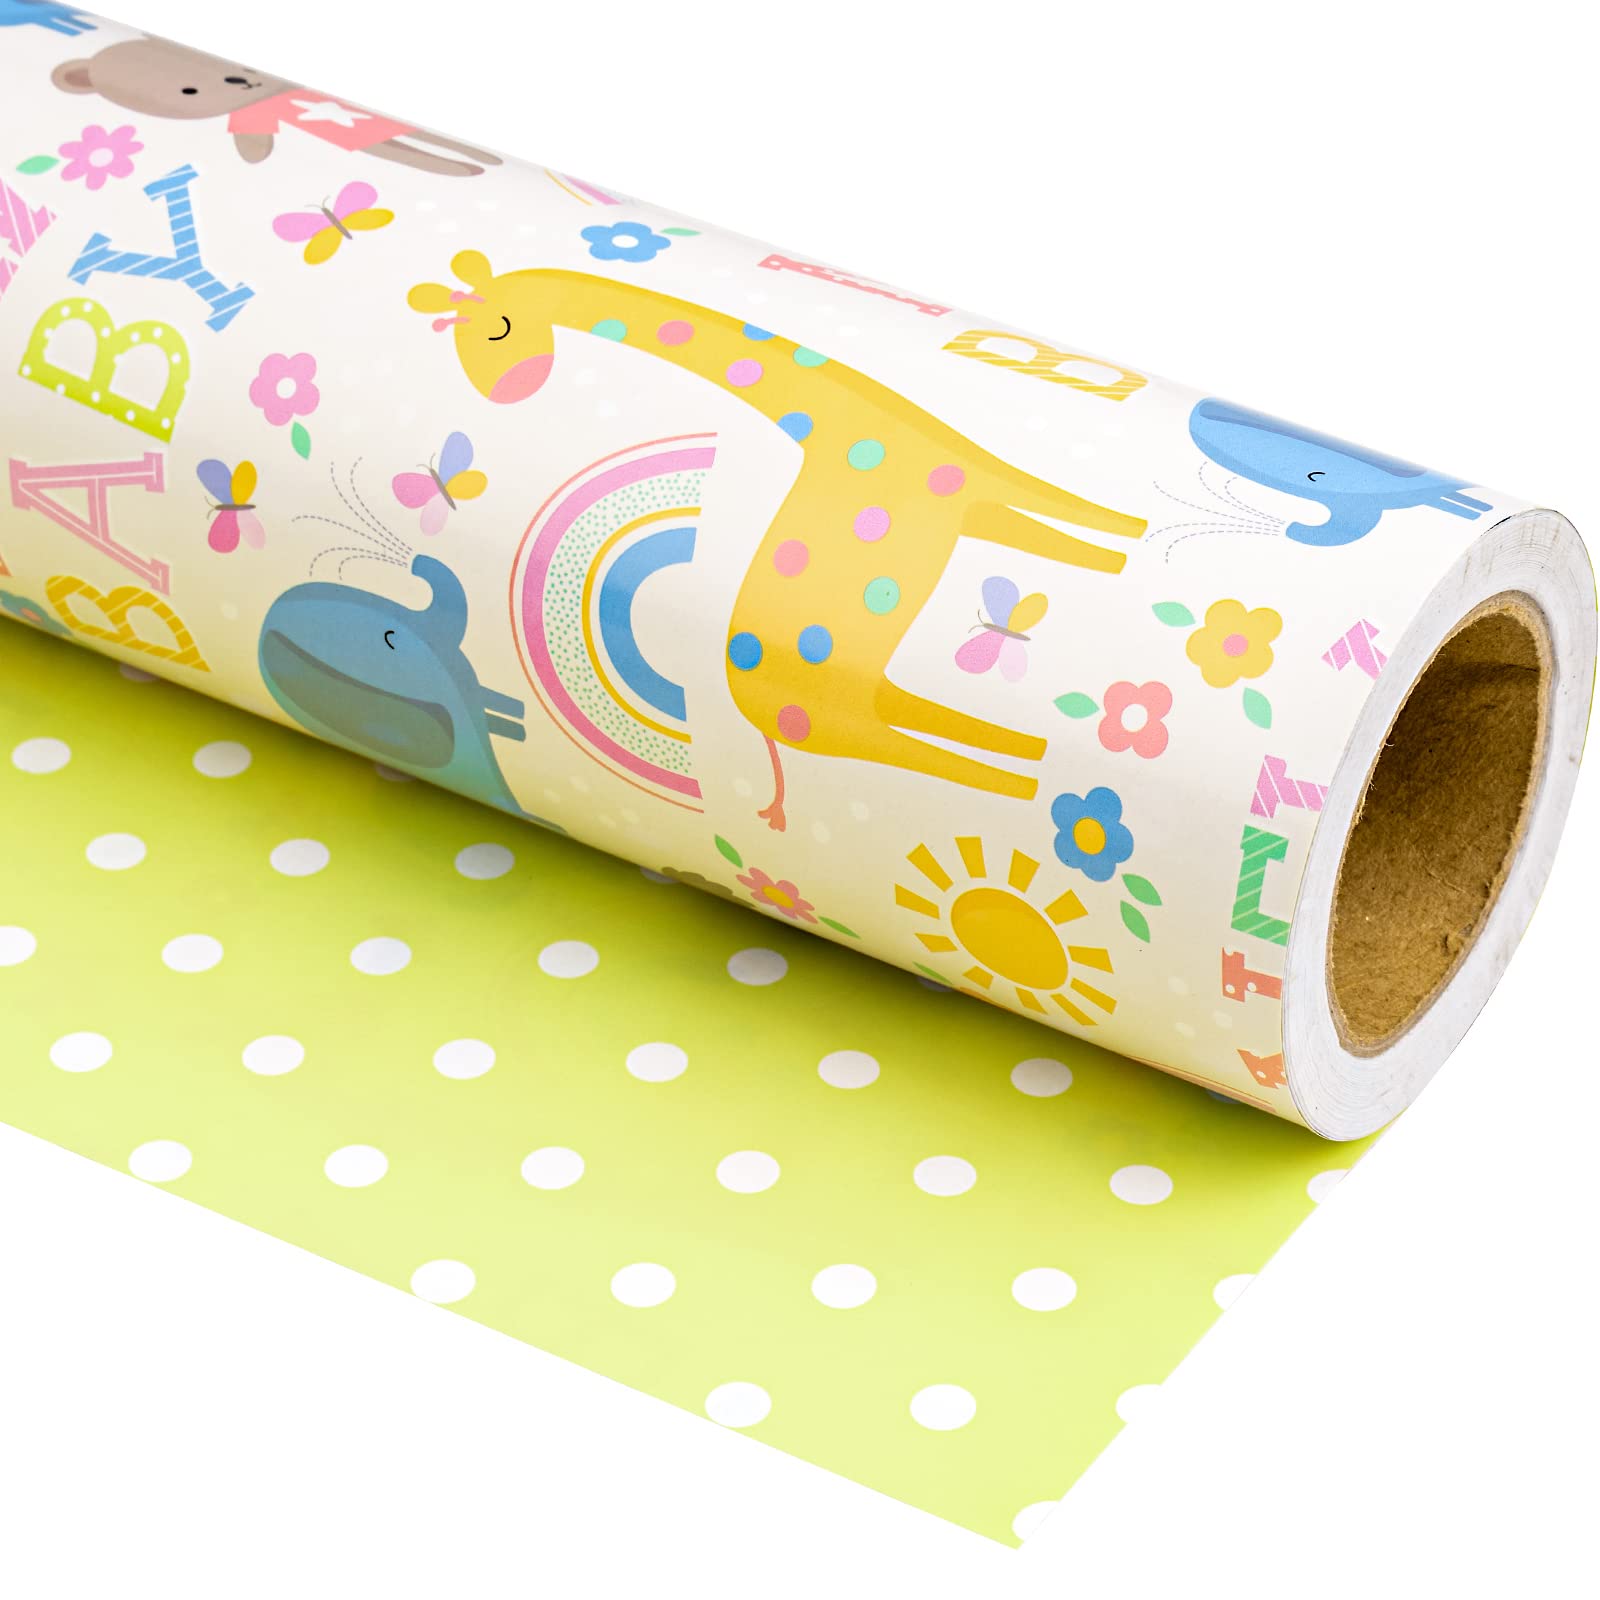 WRAPAHOLIC Reversible Baby Shower Wrapping Paper - Mini Roll - 17 Inch X 33 Feet - Animals & New Baby Design for Birthday, Holiday, Party